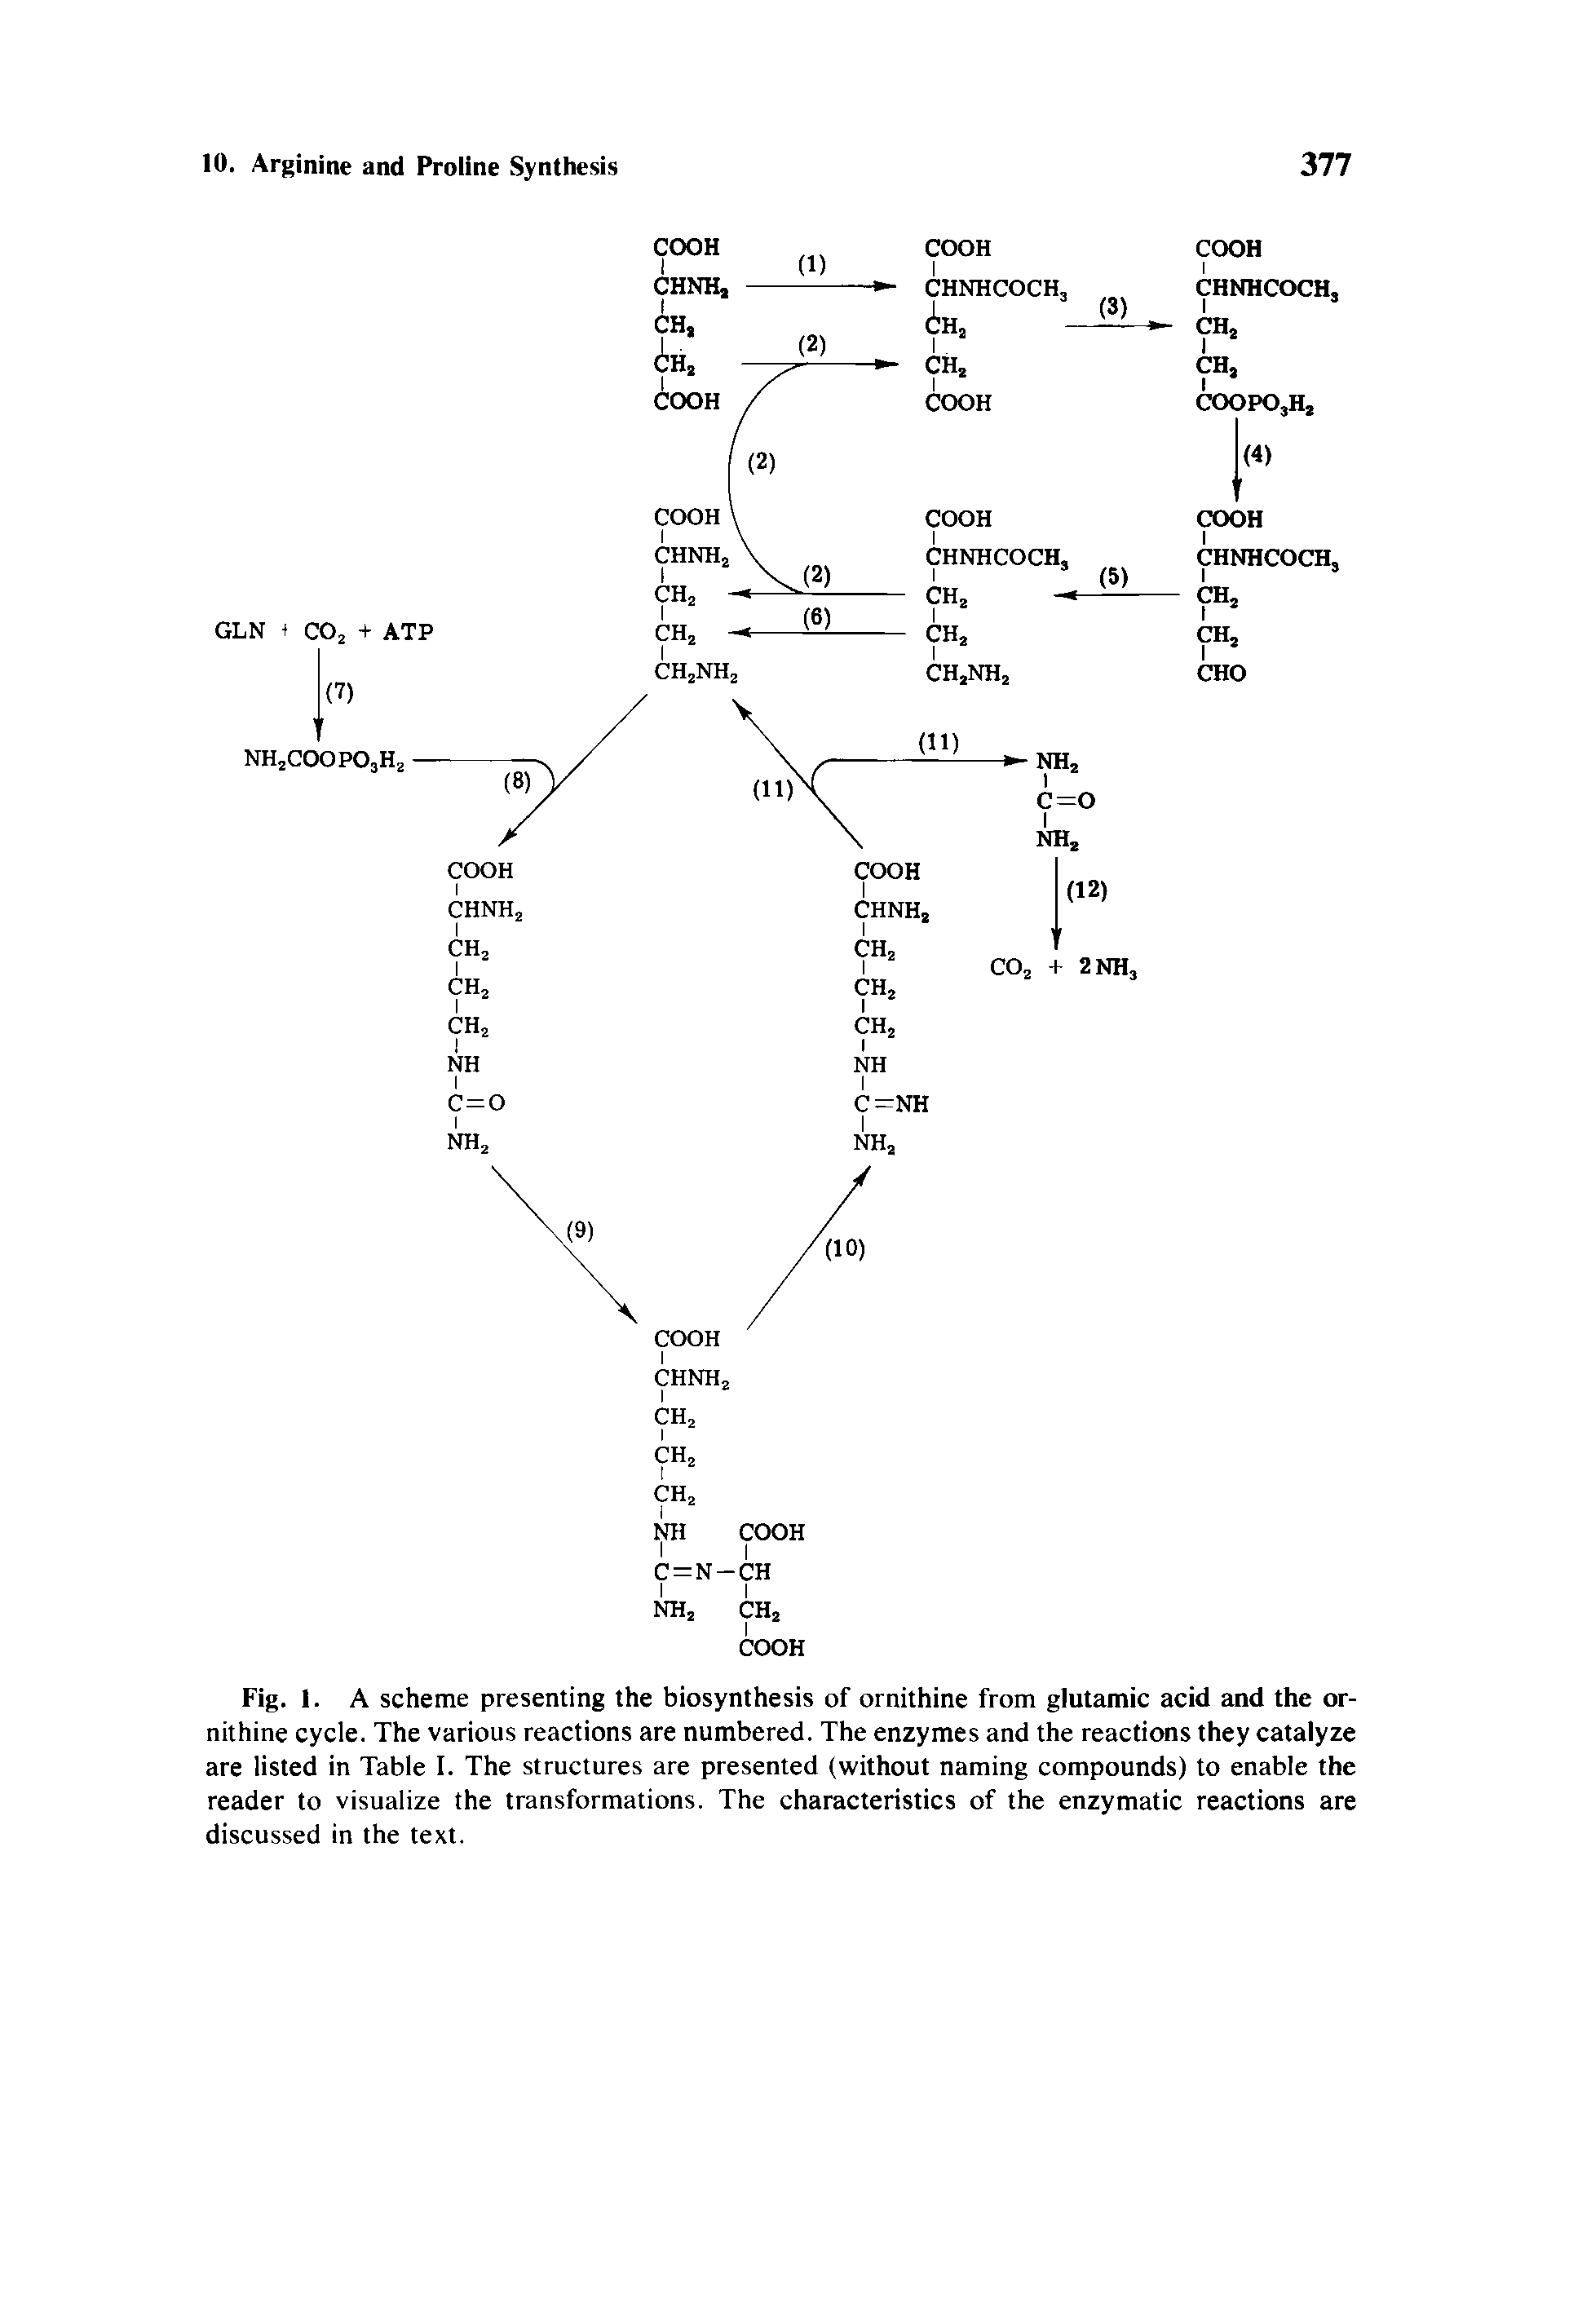 Fig. I. A scheme presenting the biosynthesis of ornithine from glutamic acid and the ornithine cycle. The various reactions are numbered. The enzymes and the reactions they catalyze are listed in Table I. The structures are presented (without naming compounds) to enable the reader to visualize the transformations. The characteristics of the enzymatic reactions are discussed in the text.